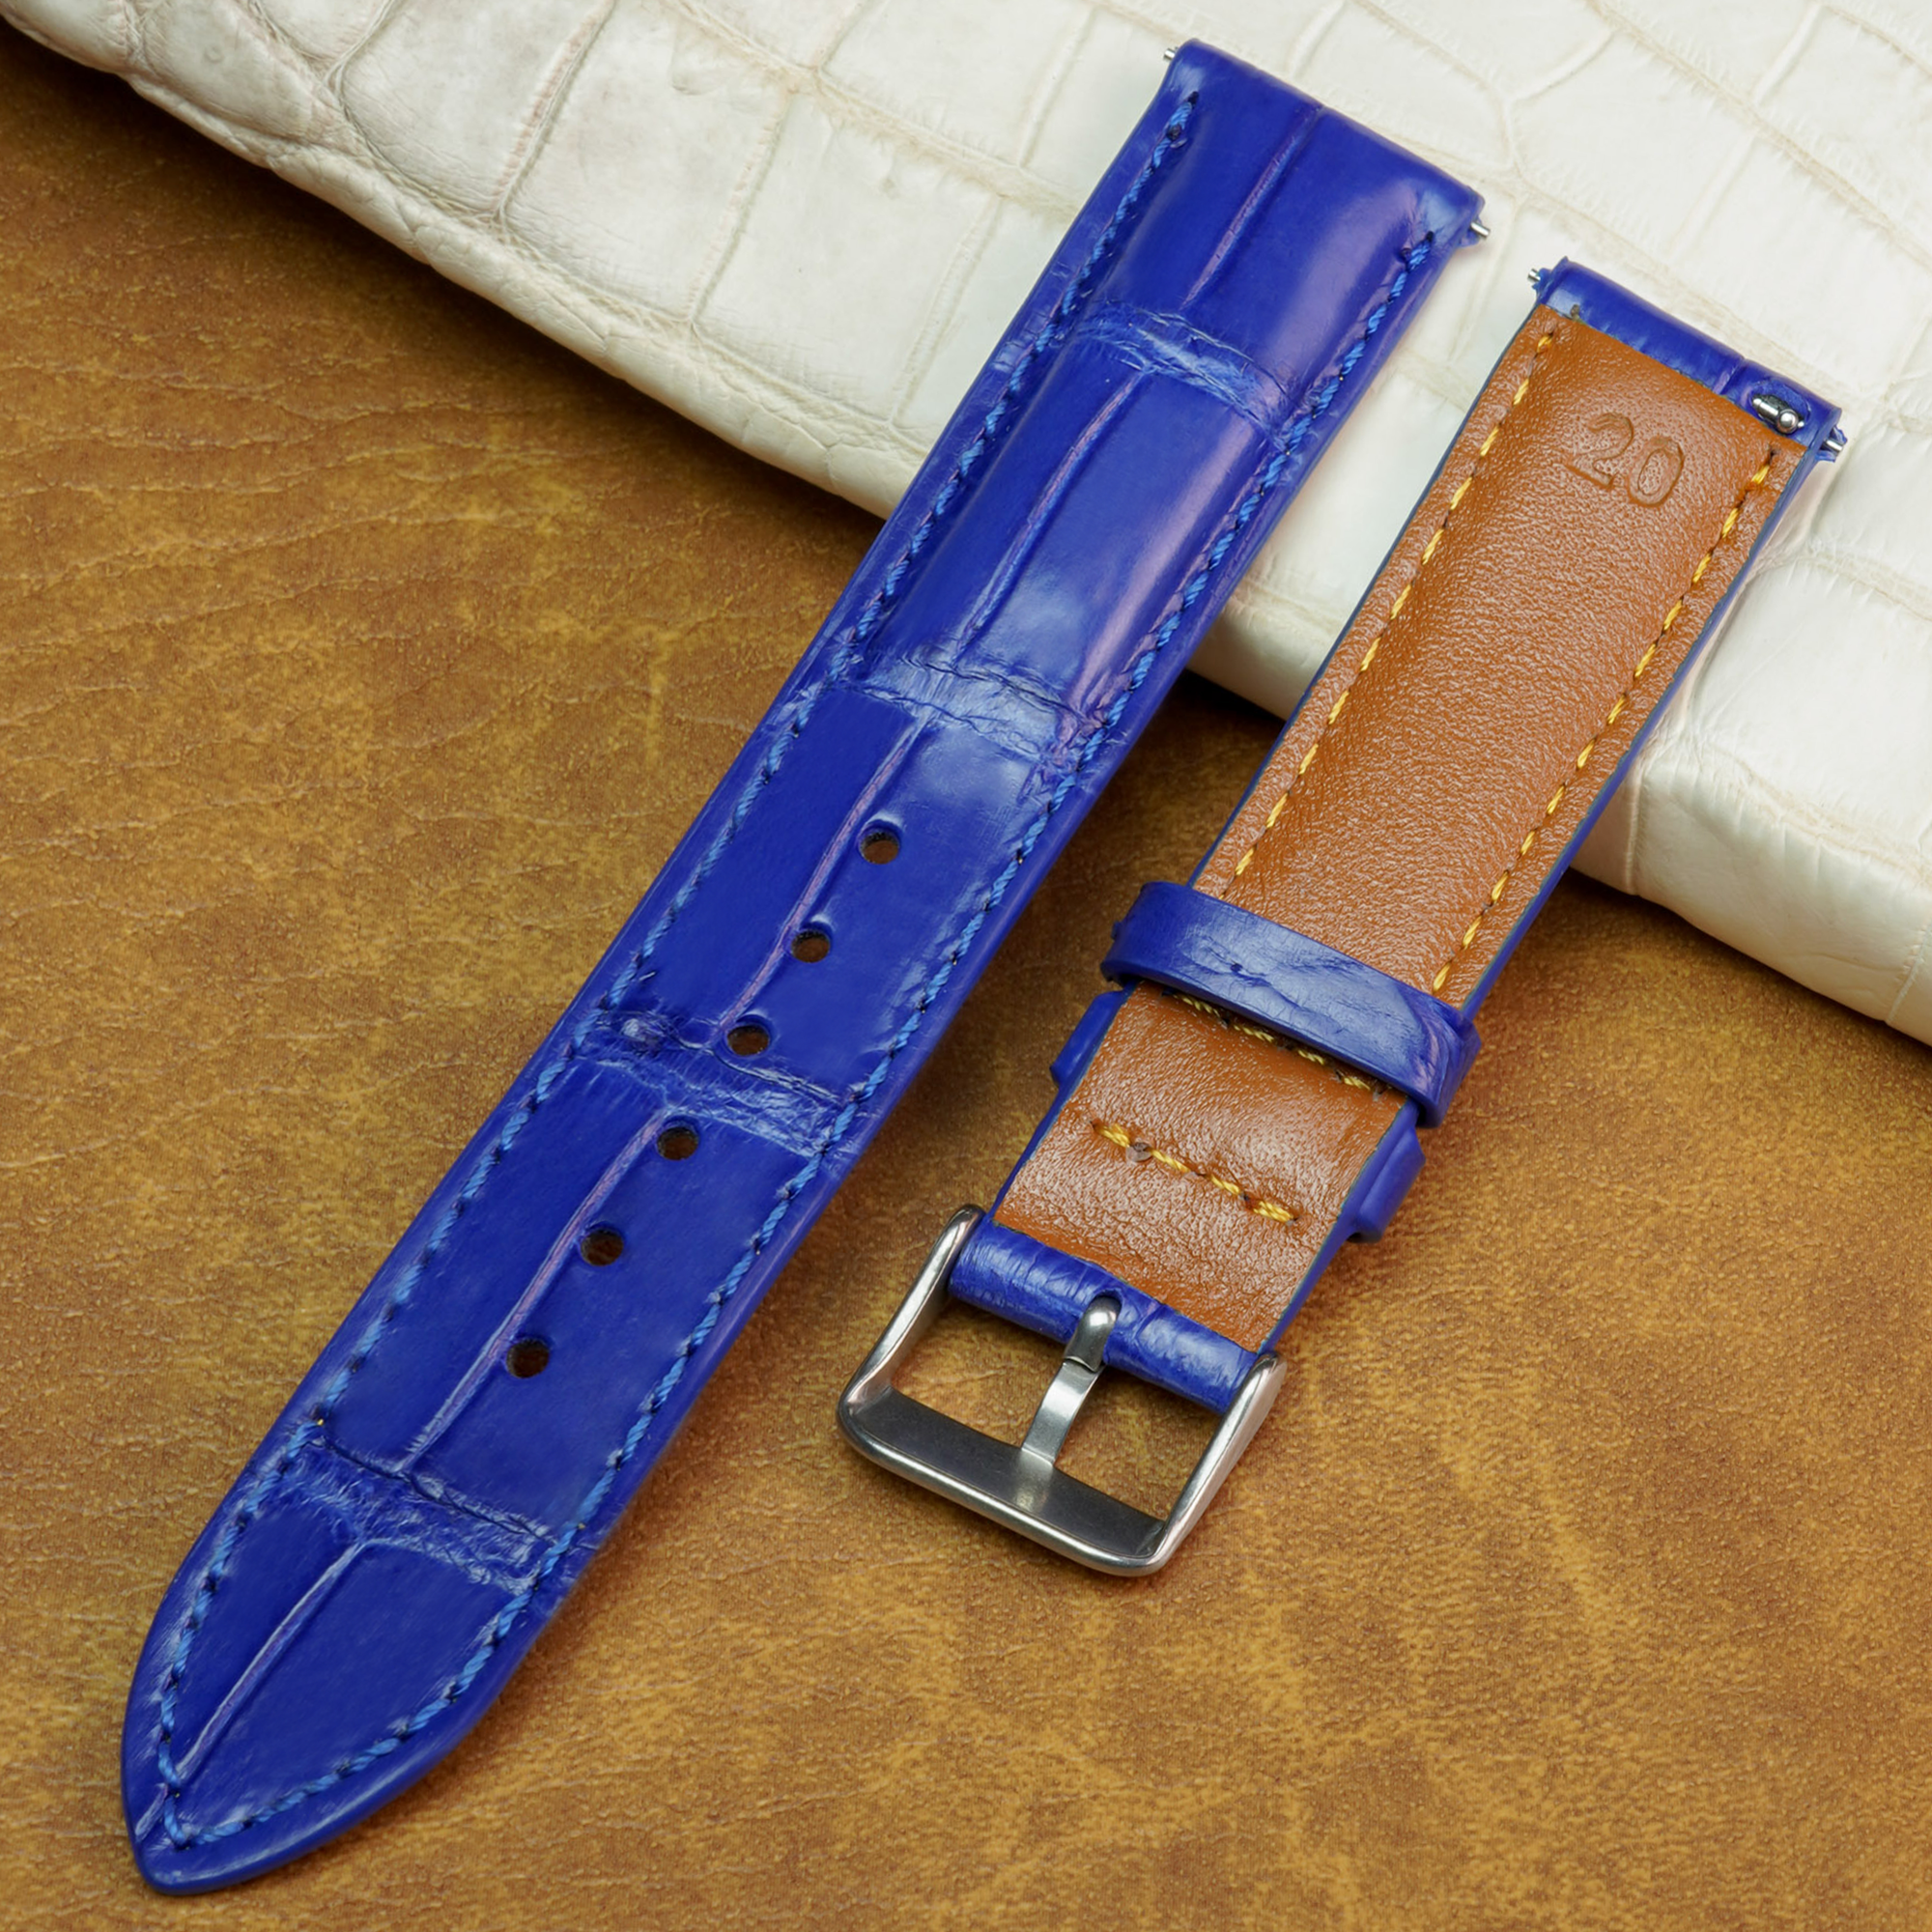 Handmade Light Blue Alligator Leather Watch Band For Men | Premium Crocodile Quick Release Replacement Wristwatch Strap | DH-05